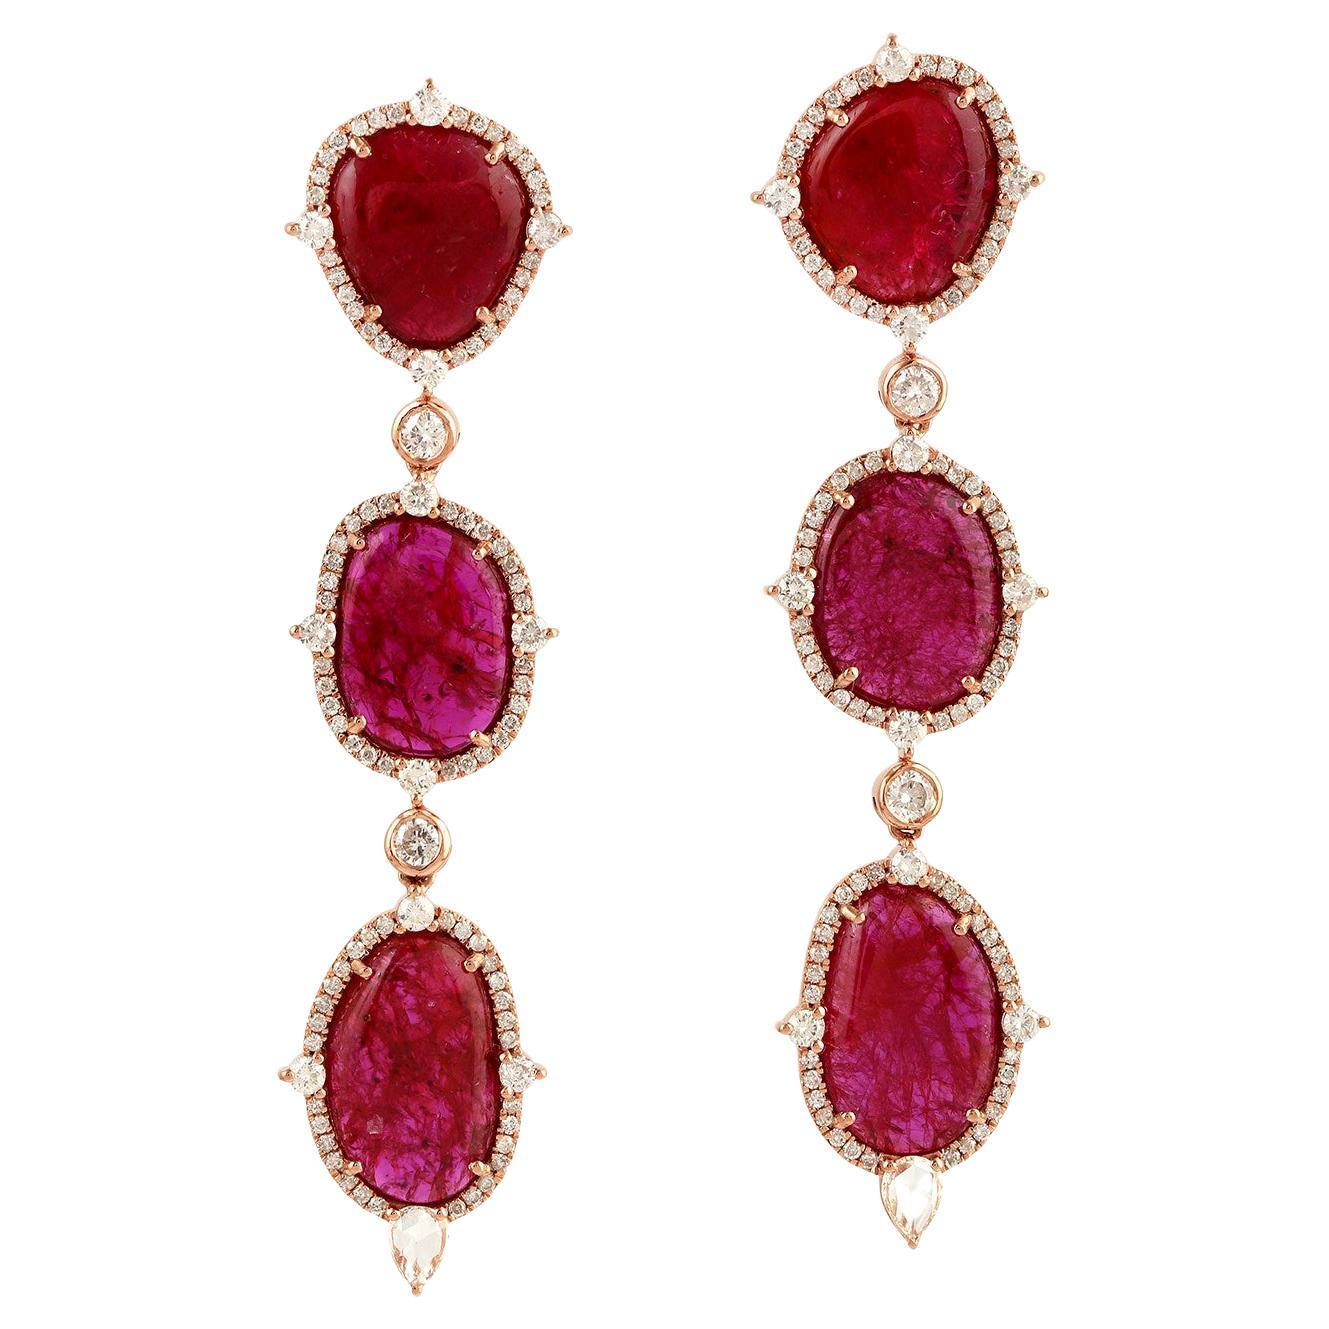 21.34ct 3 Tier Ruby Dangle Earrings With Diamonds Made In 18k Yellow Gold